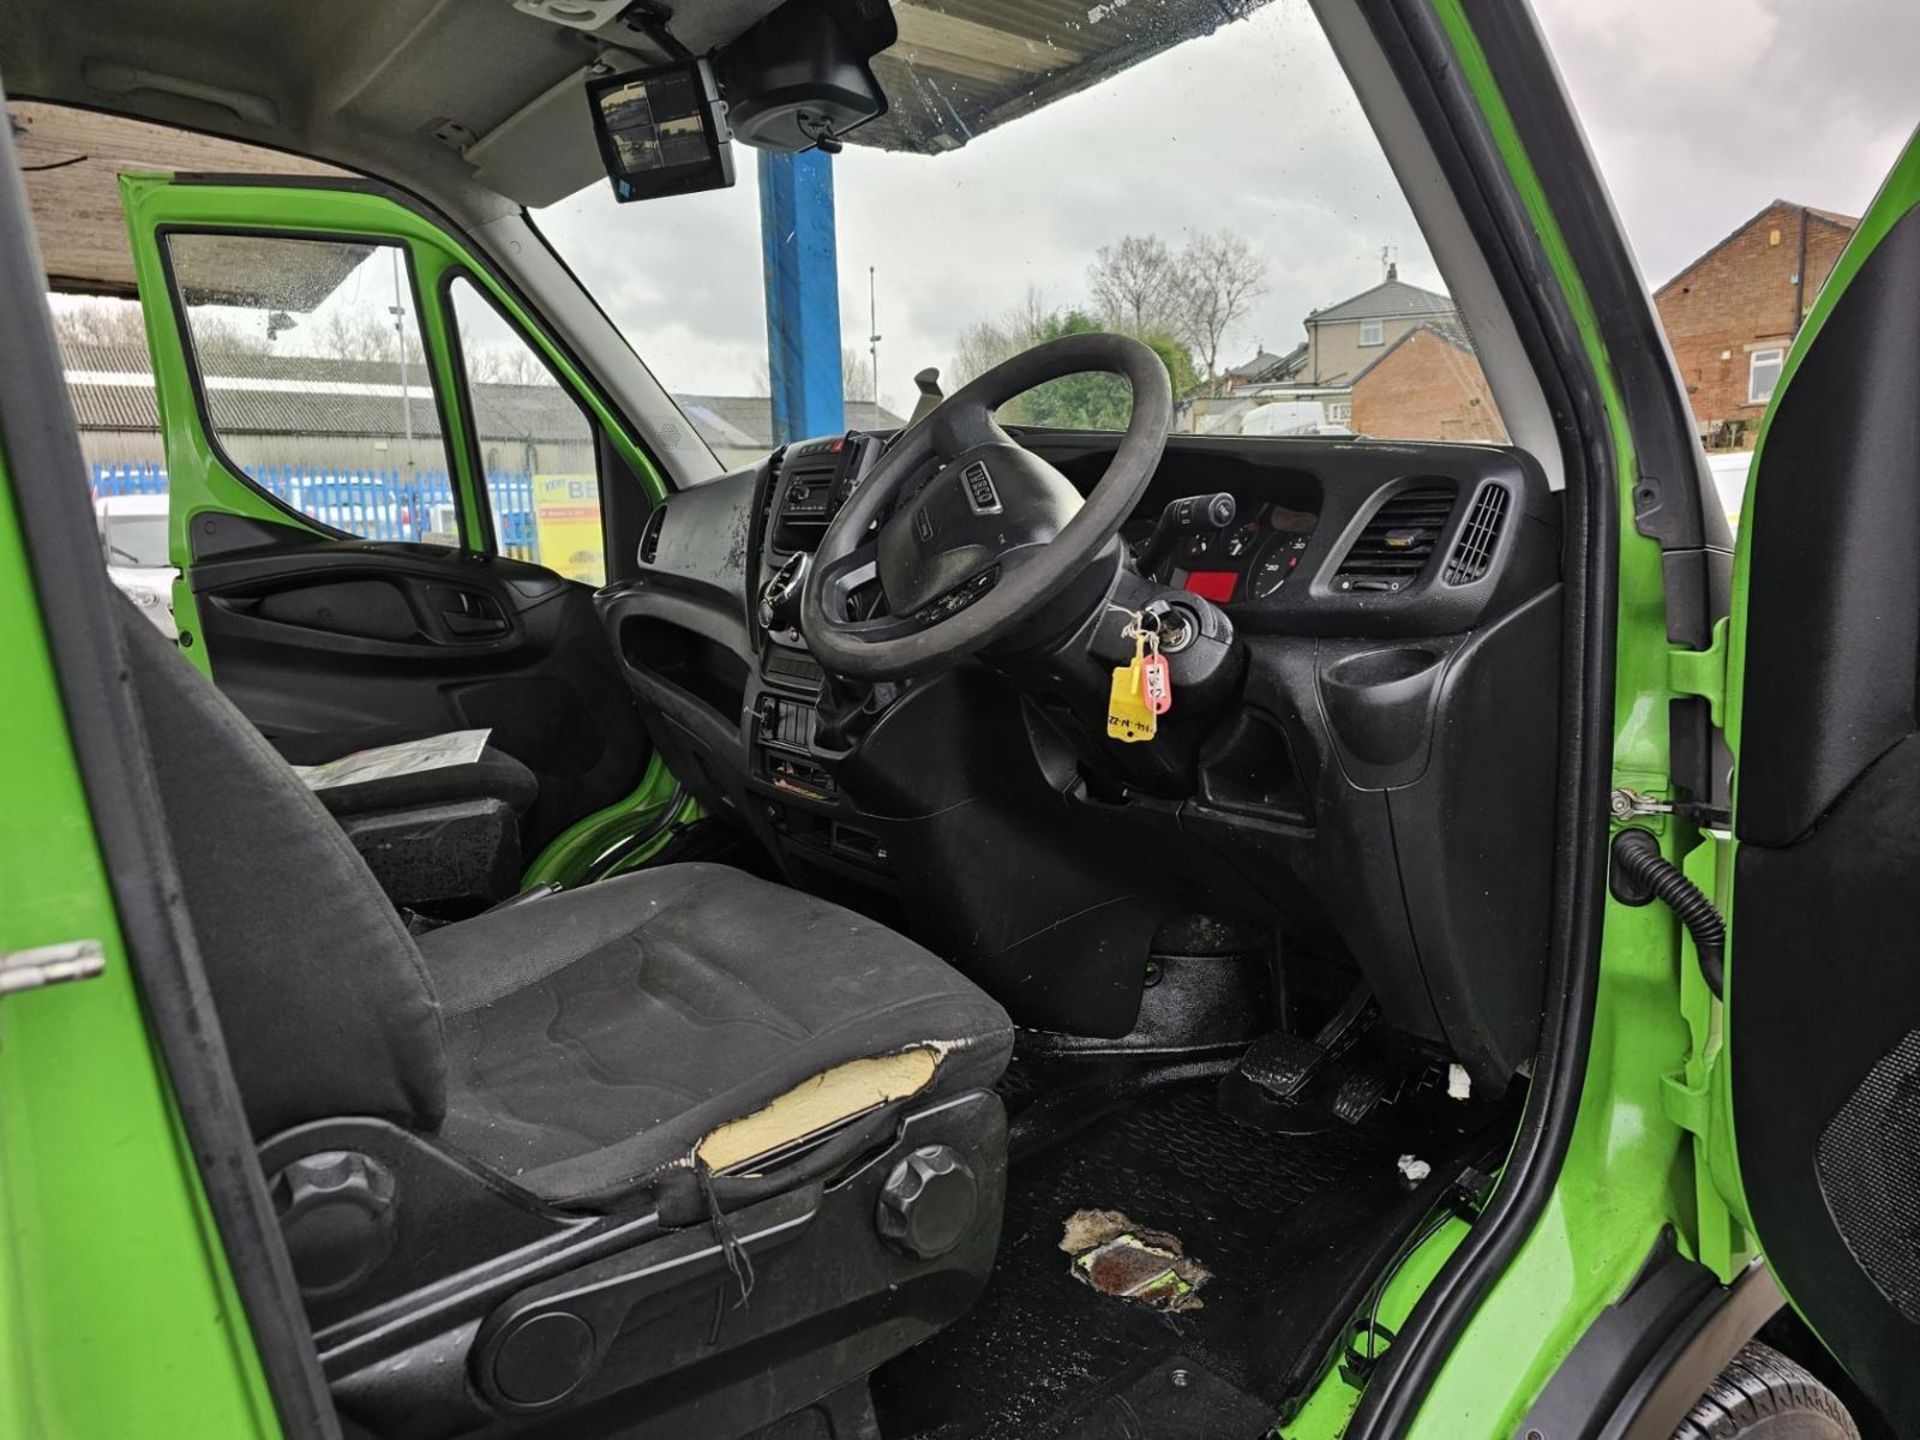 2018 IVECO DAILY 35S12 AUTOEURO6 CHASSIS CAB - Image 3 of 11